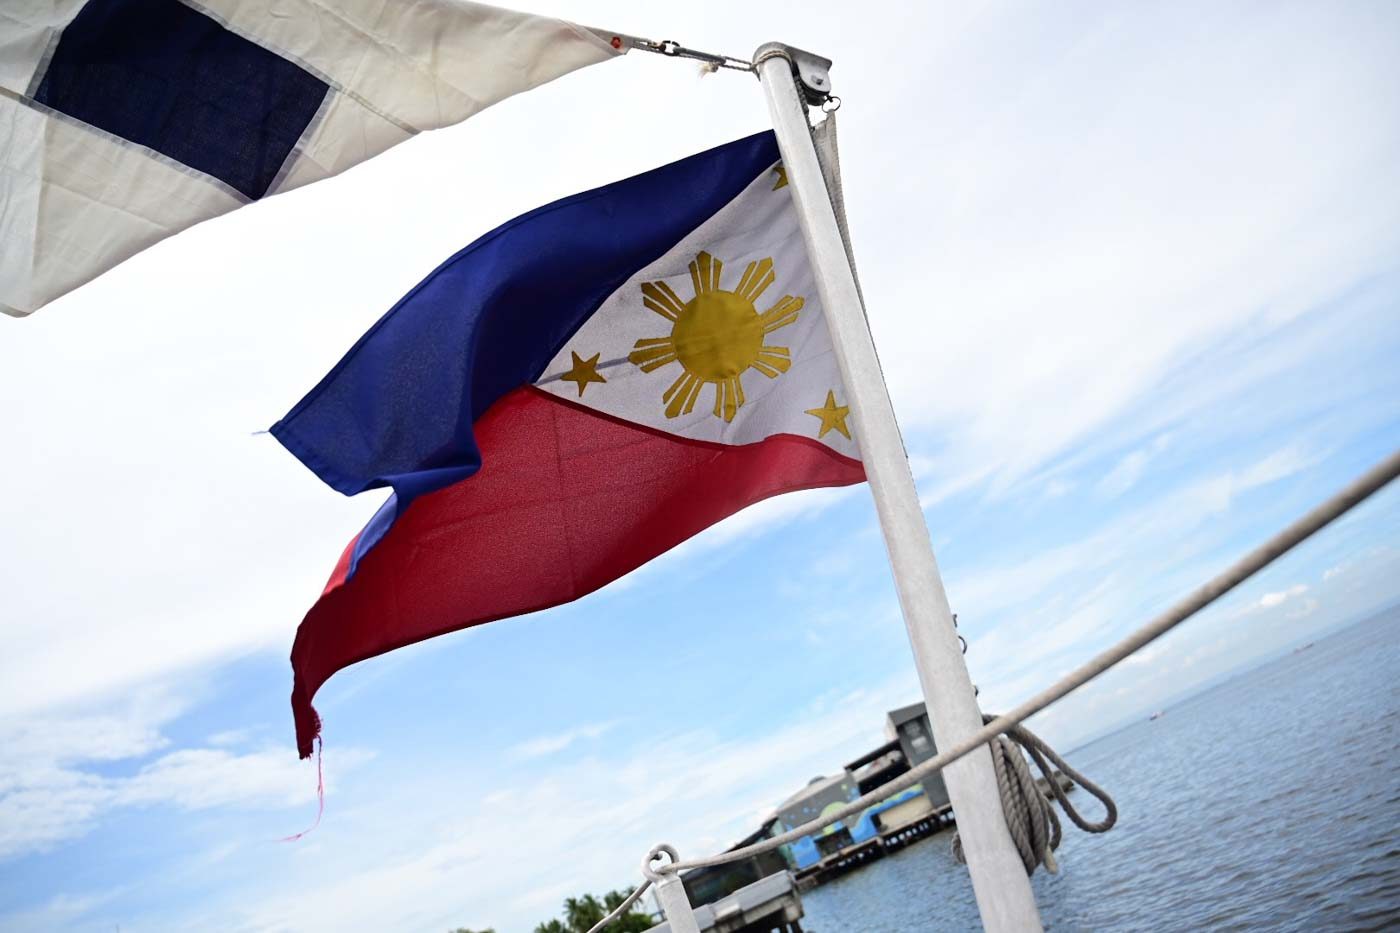 LUNETA PARK, MANILA. The Philippine Coast Guard holds an open house at the South Harbor, showcasing the new motor boats and jet skis on Independence Day, June 12, 2019. Photo by Alecs Ongcal/Rappler   